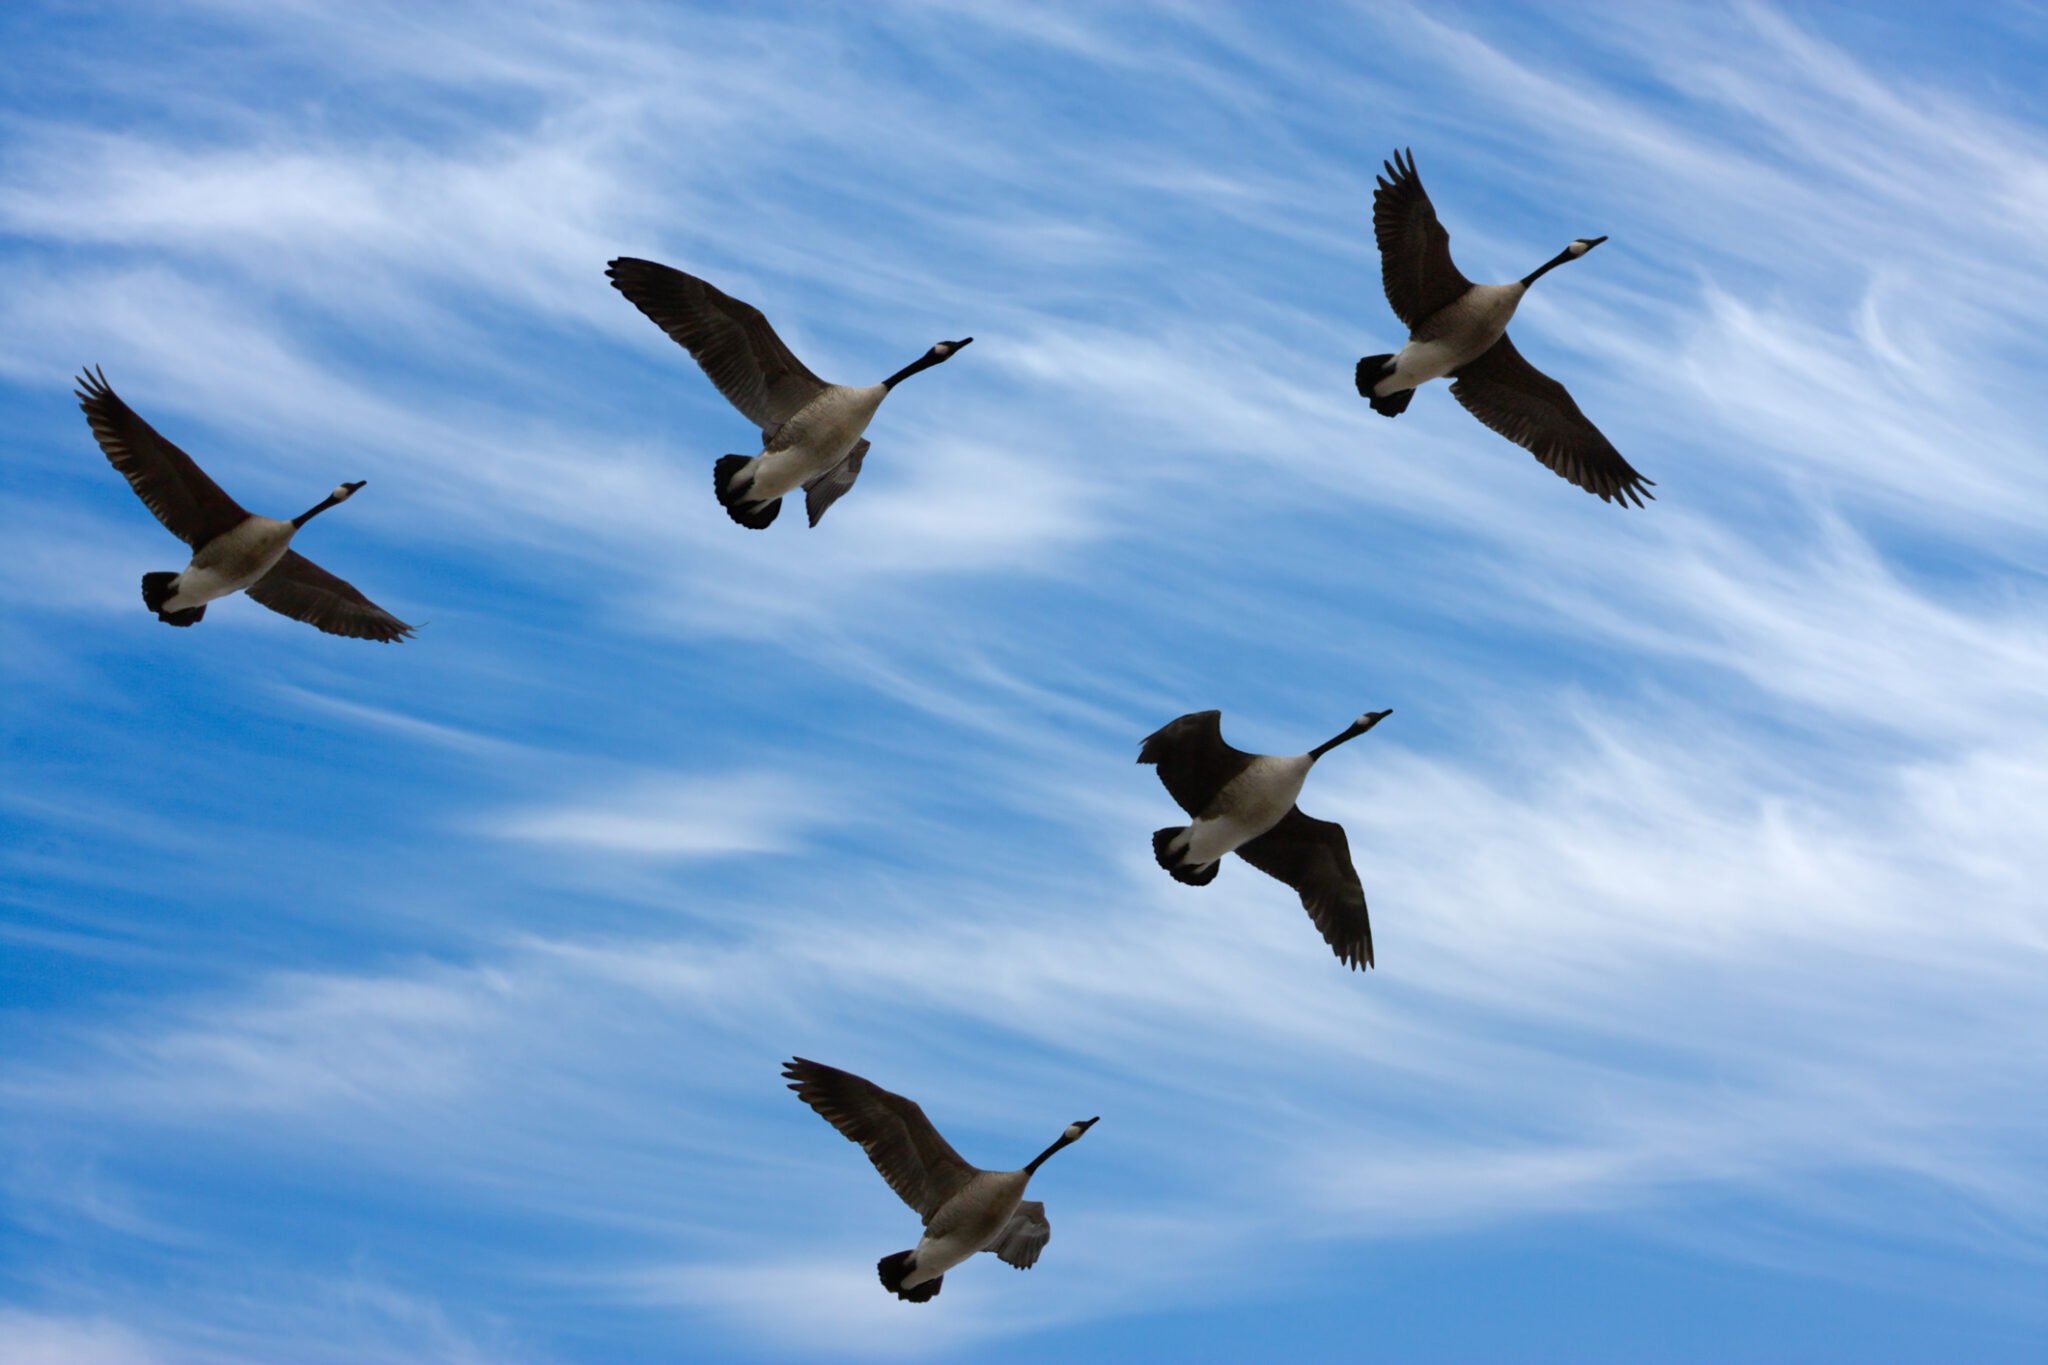 why do geese fly in a v formation why is it more efficient and how does it help birds fly further